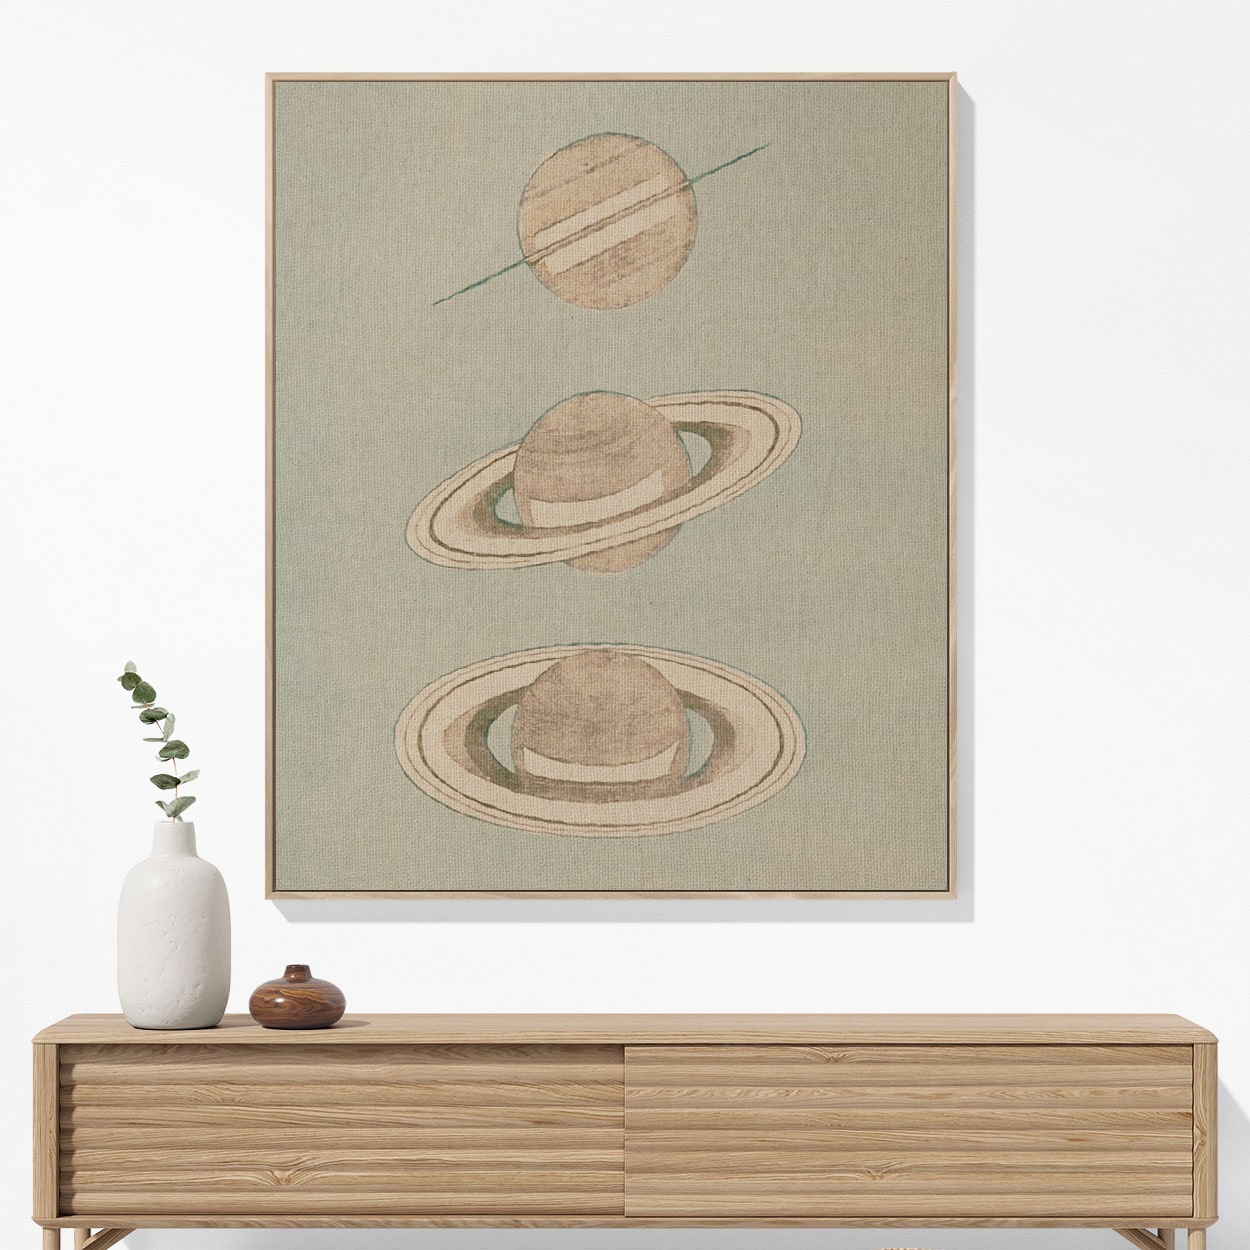 The Rings of Saturn Woven Blanket Woven Blanket Hanging on a Wall as Framed Wall Art